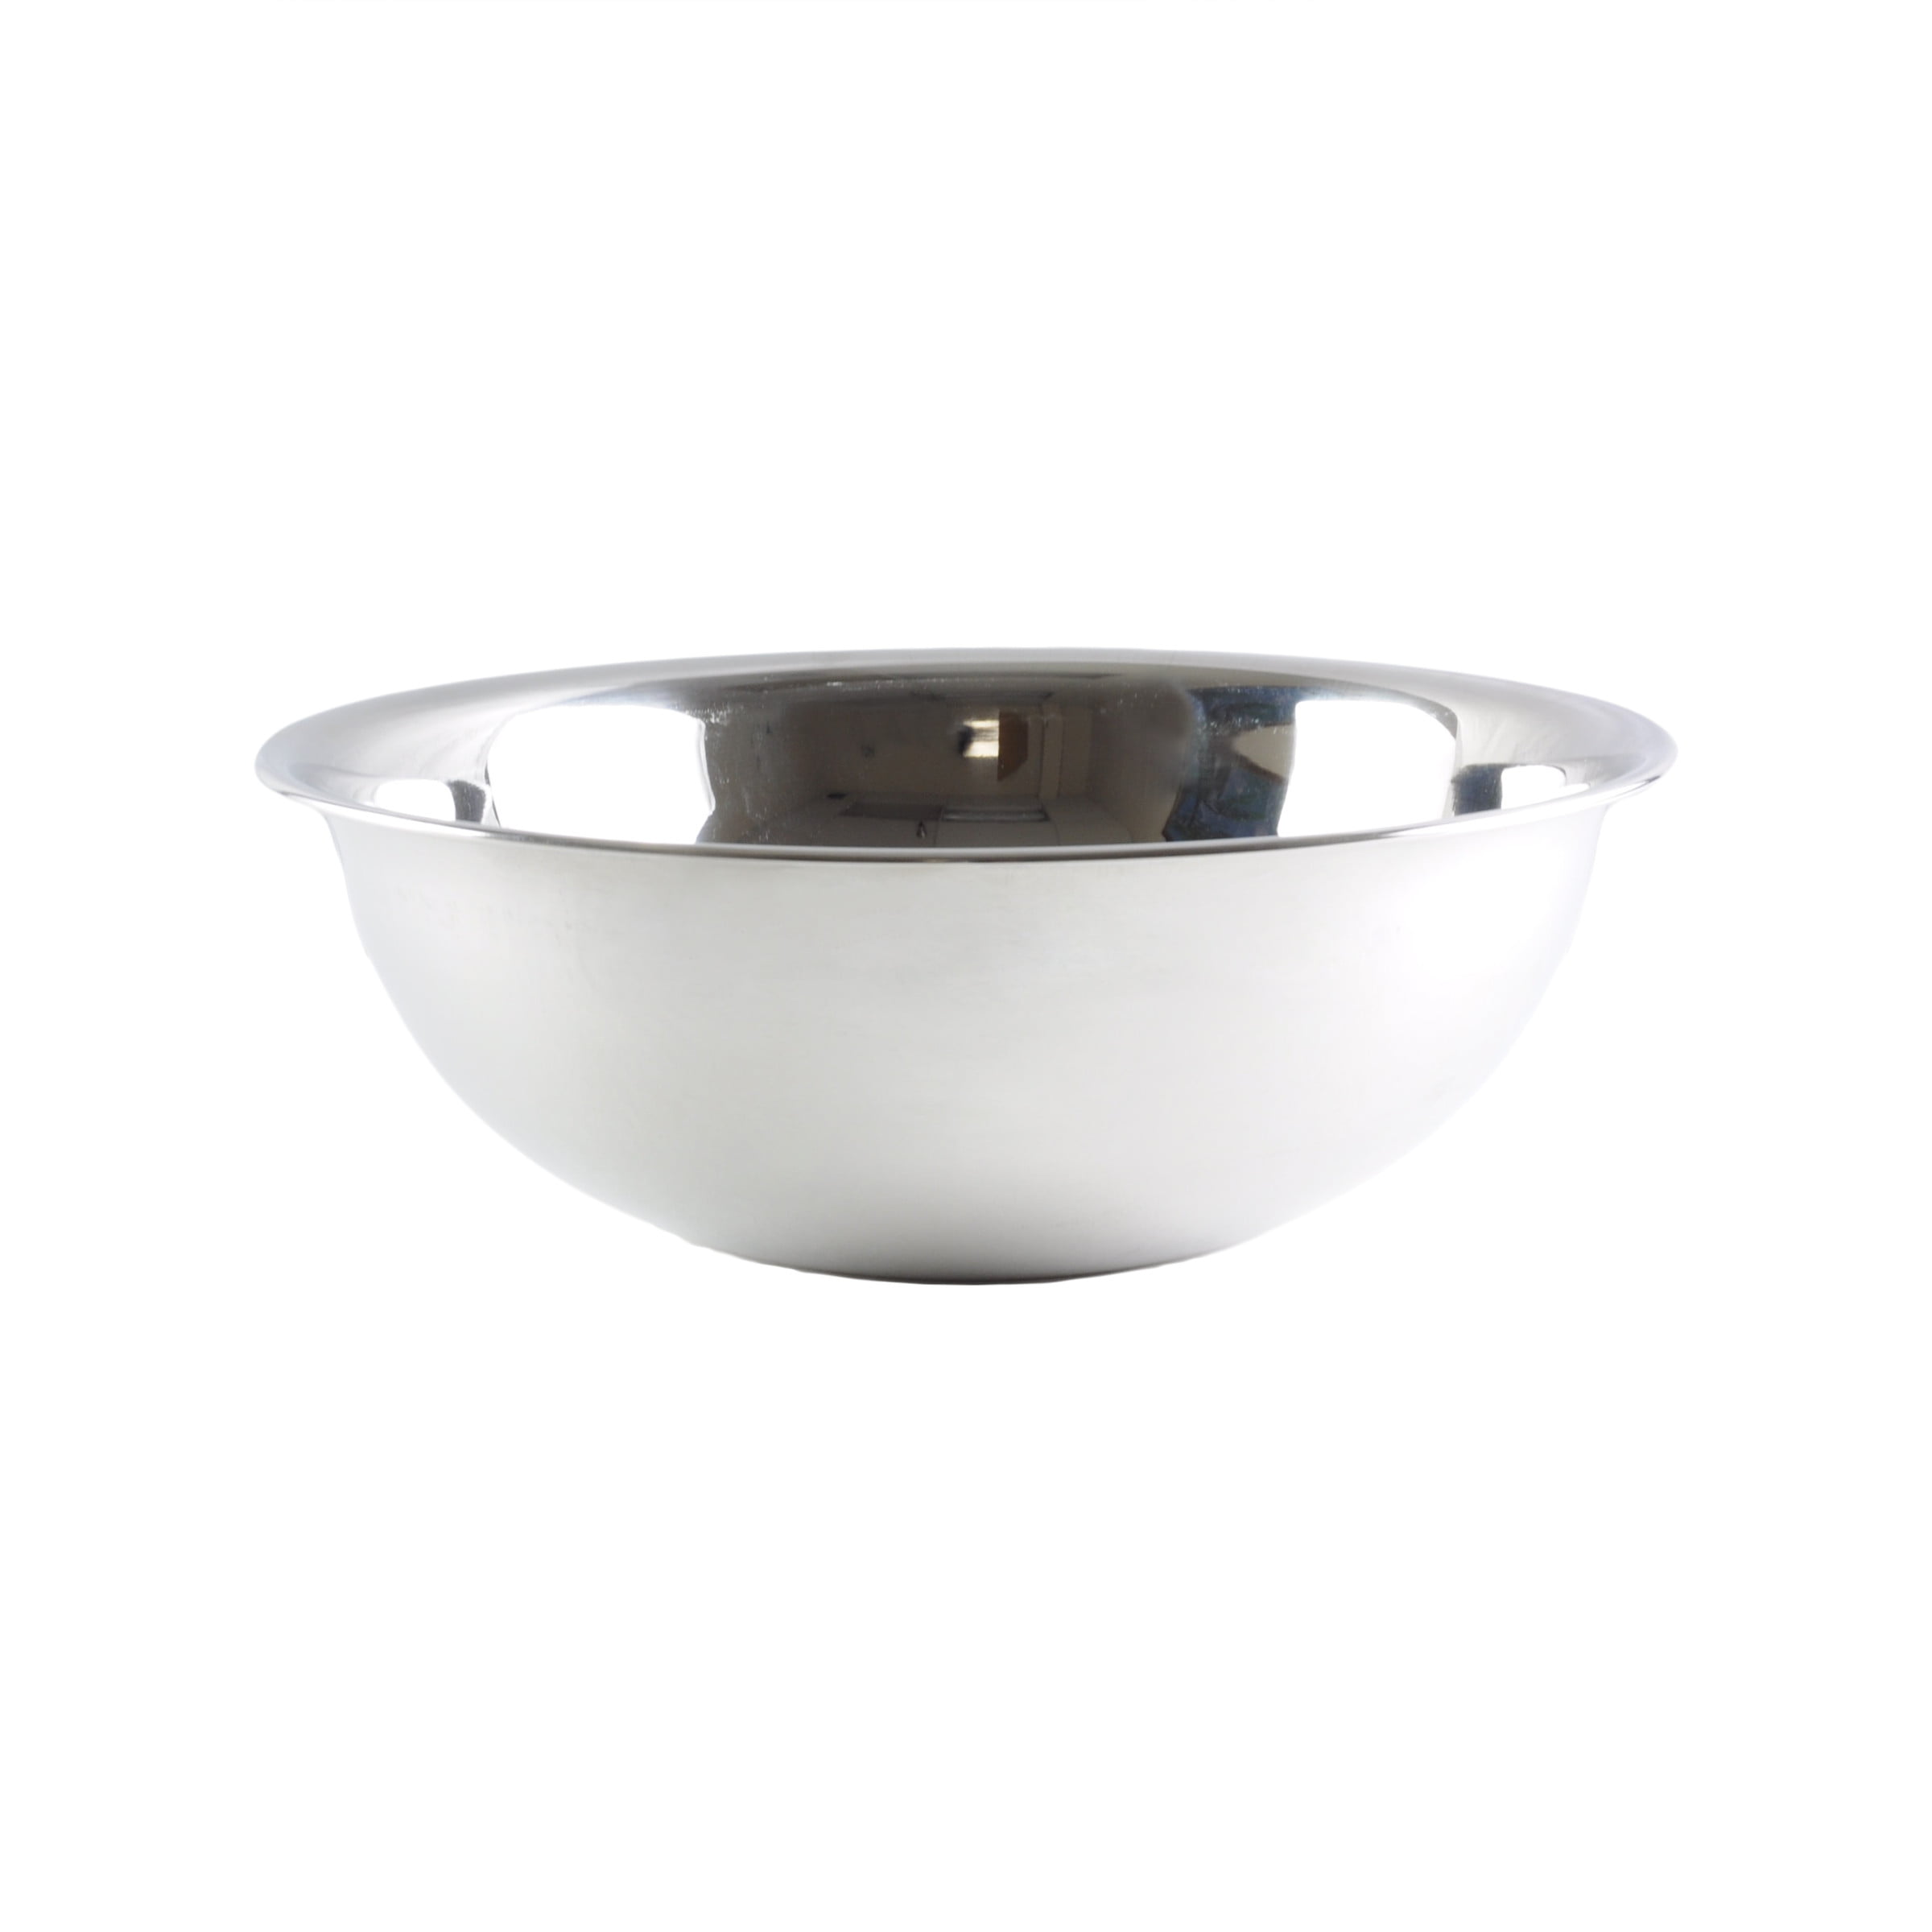 16 Quart Mixing Bowl, Heavy Duty,Stainless Steel, 22 Gauge (0.8 Mm), Comes  In Each